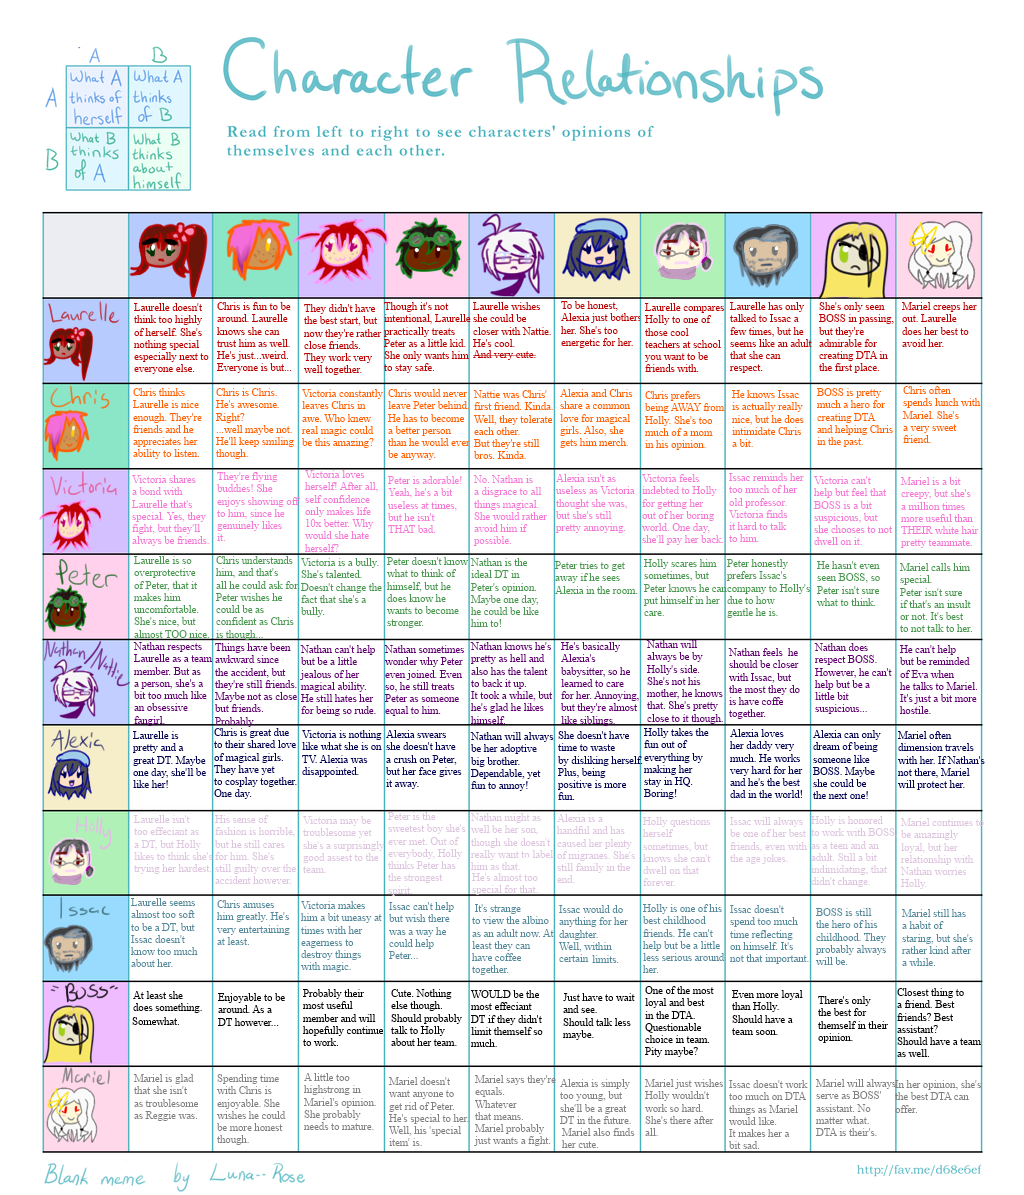 character-relationship-chart-by-lyricalupin-on-deviantart